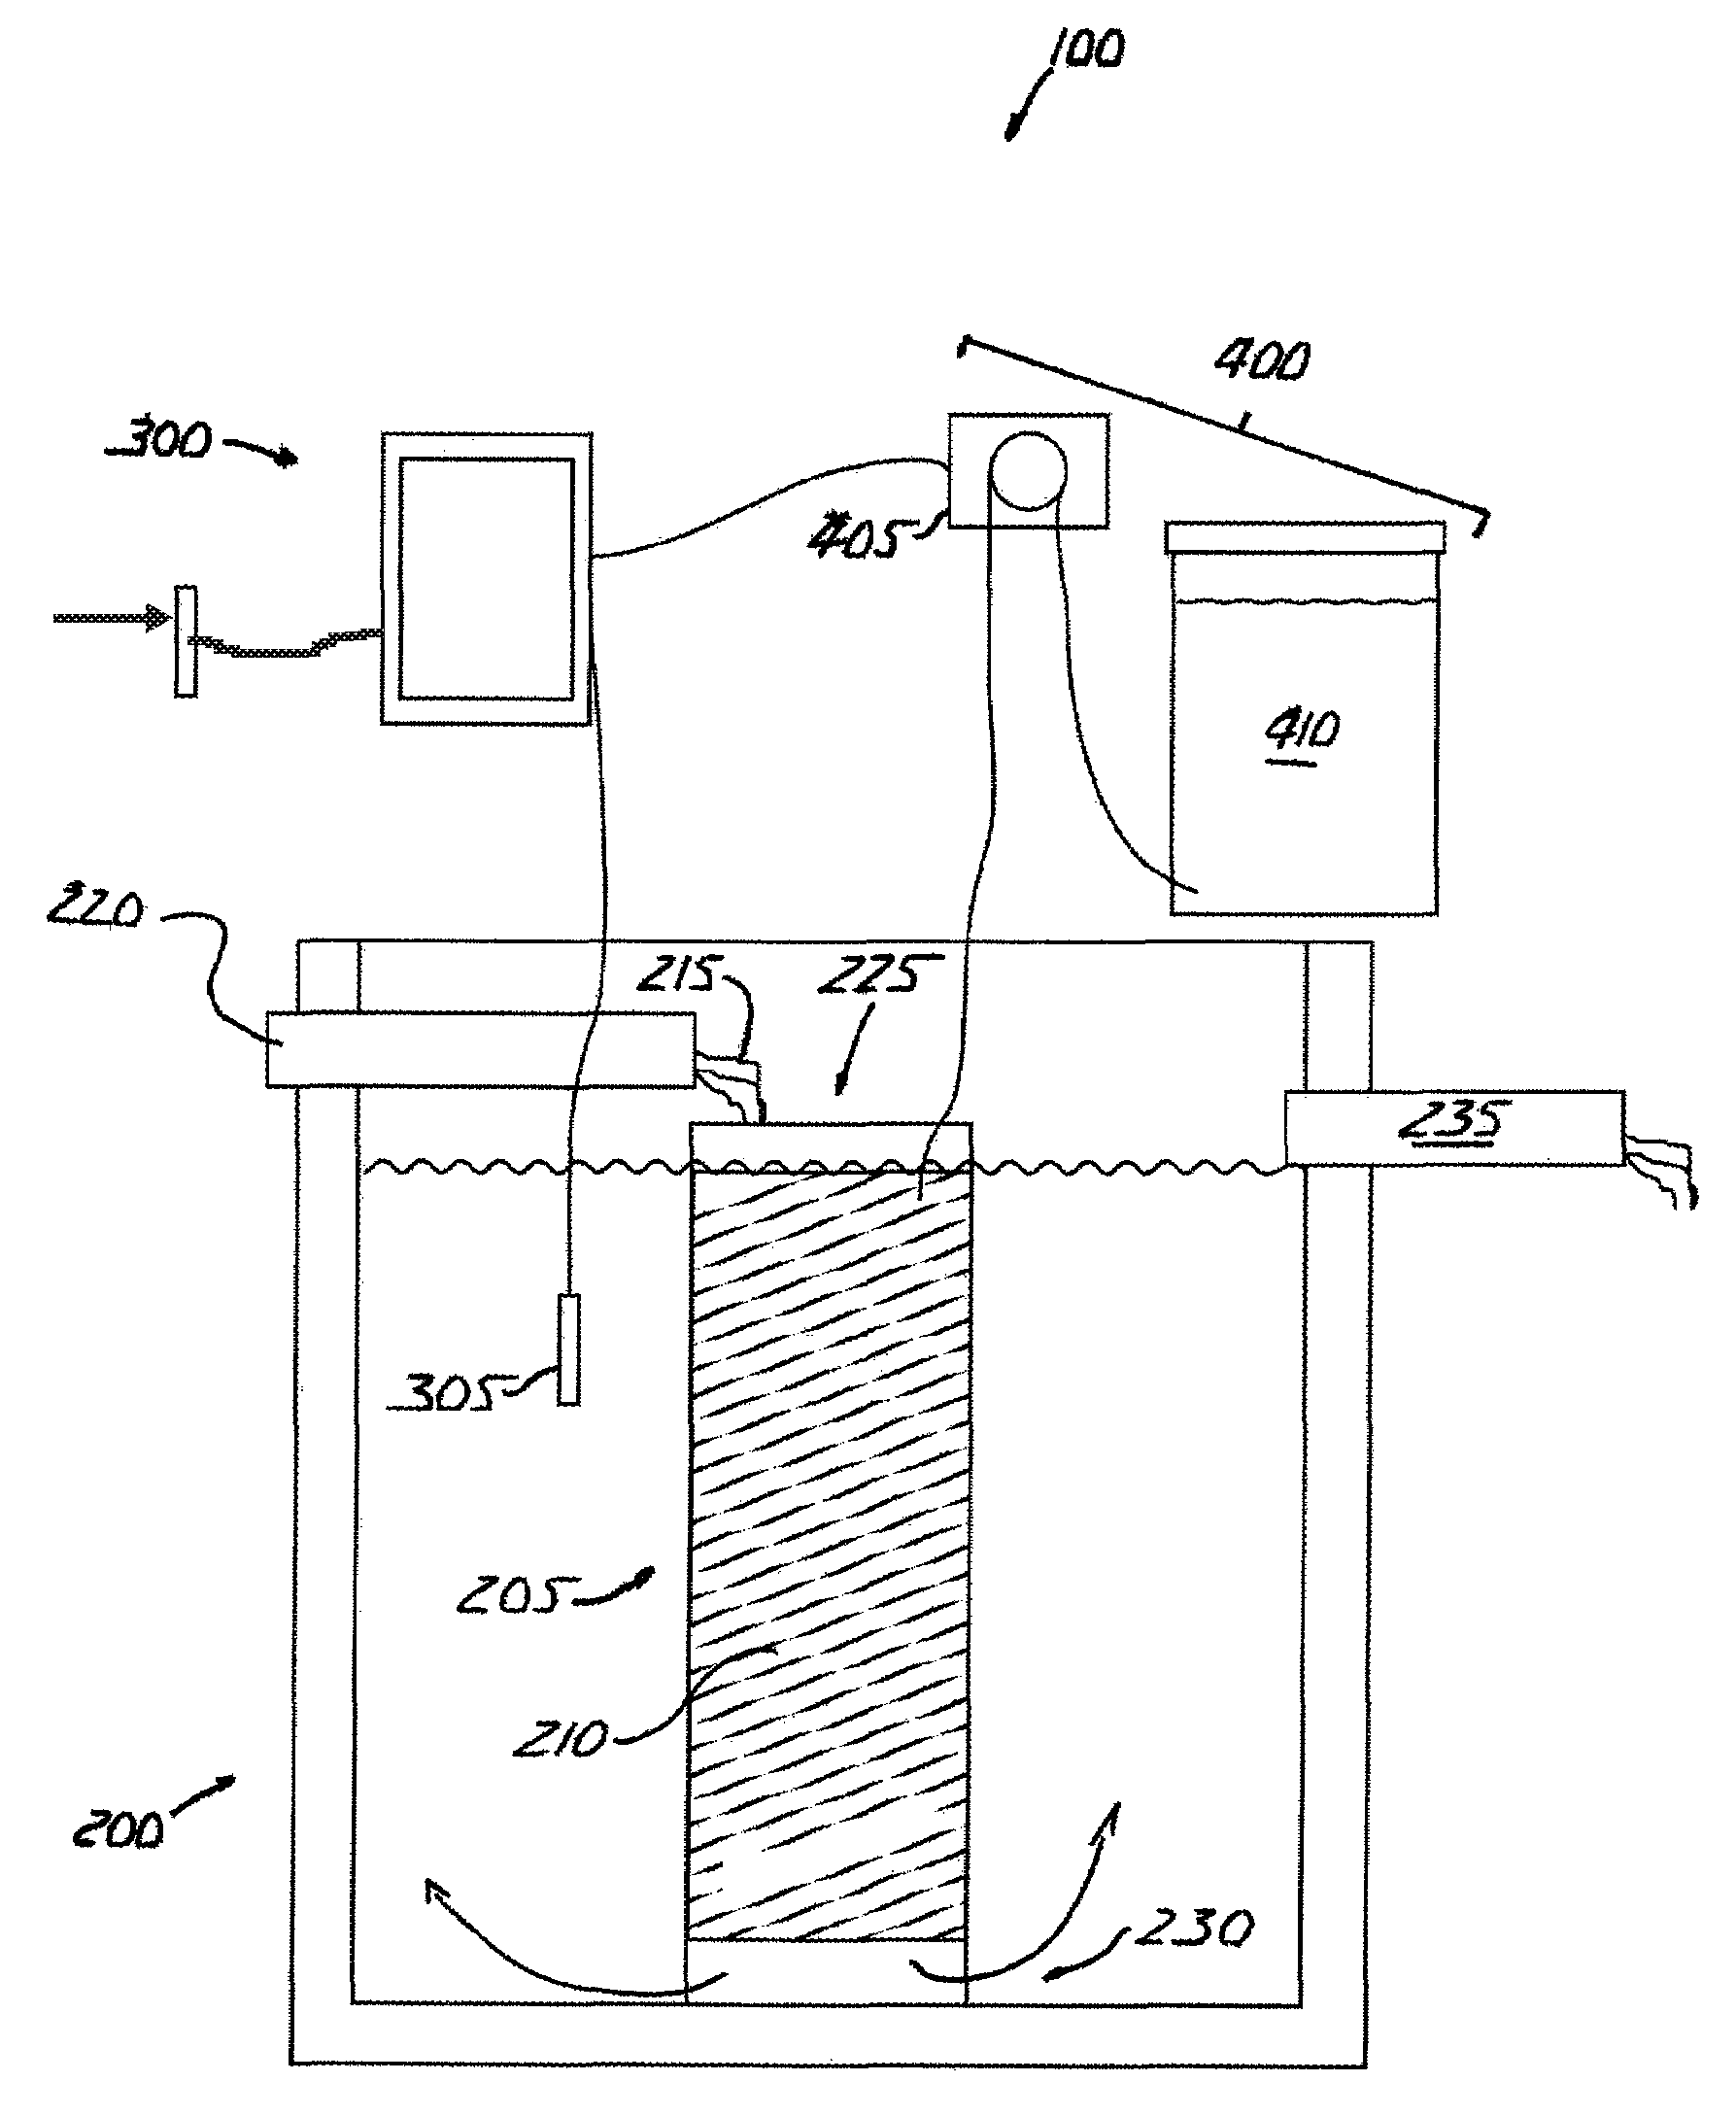 Apparatus for denitrifying wastewater